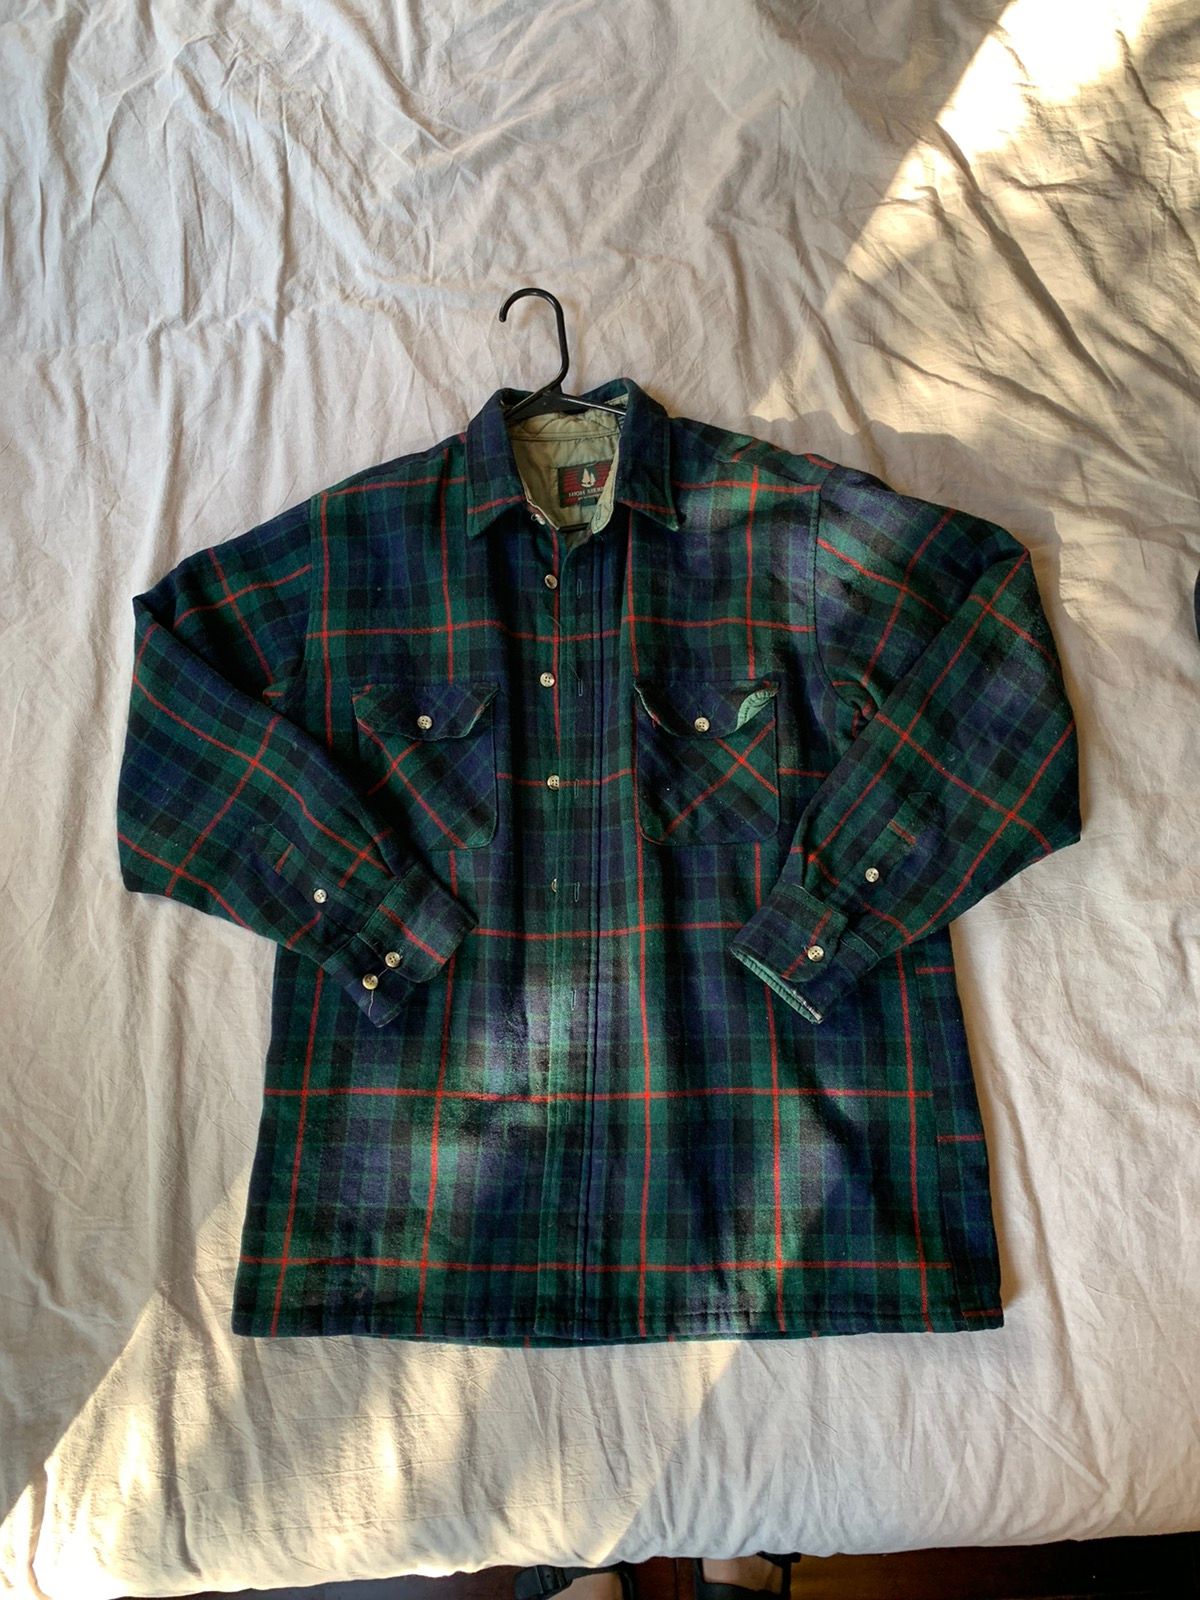 Vintage Green Plaid Shirt Jacket with Lining Size US L / EU 52-54 / 3 - 1 Preview